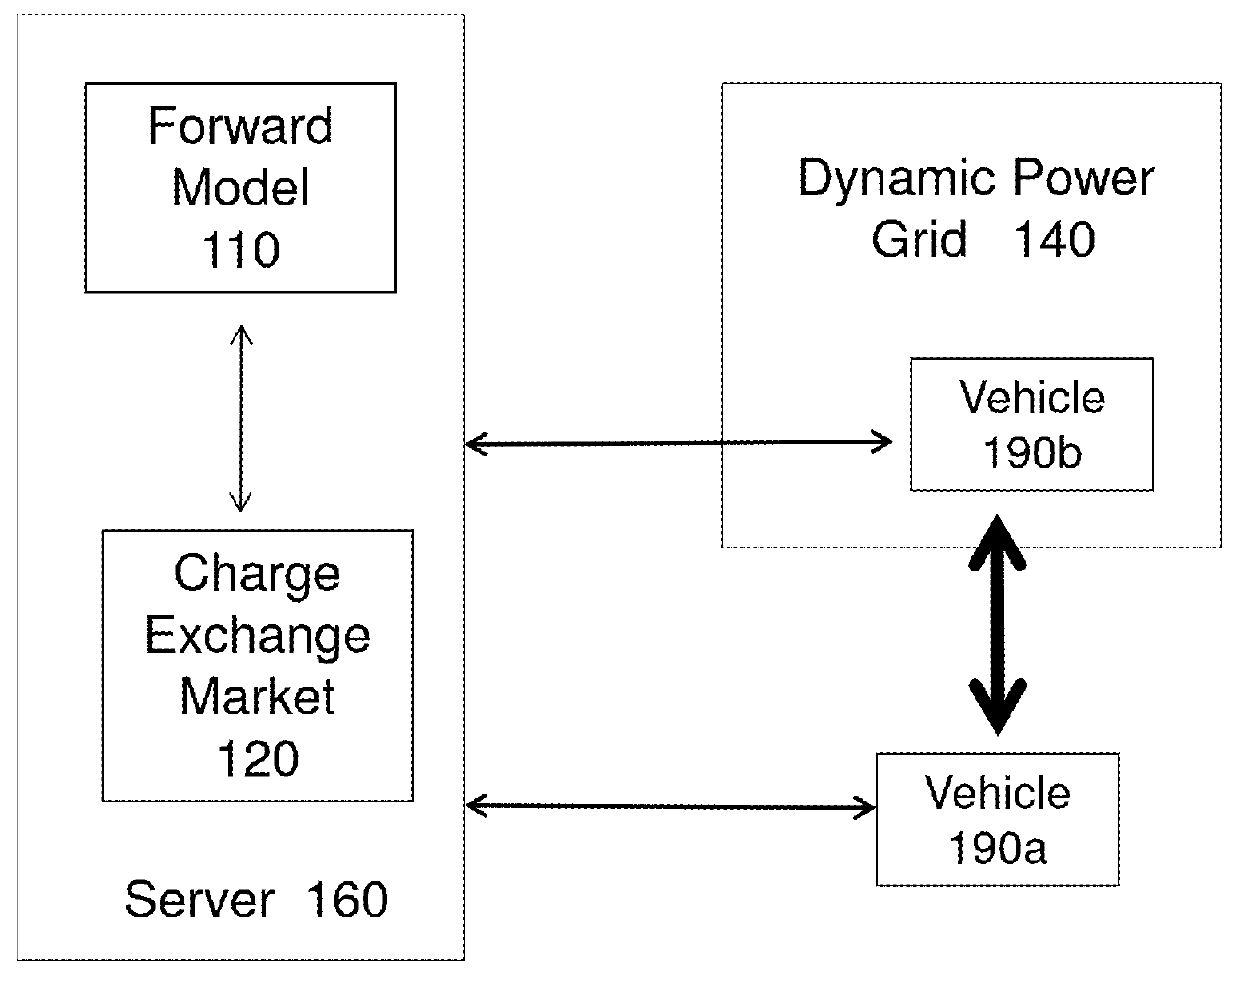 System and method of charging a vehicle using a dynamic power grid, and system and method of managing power consumption in the vehicle